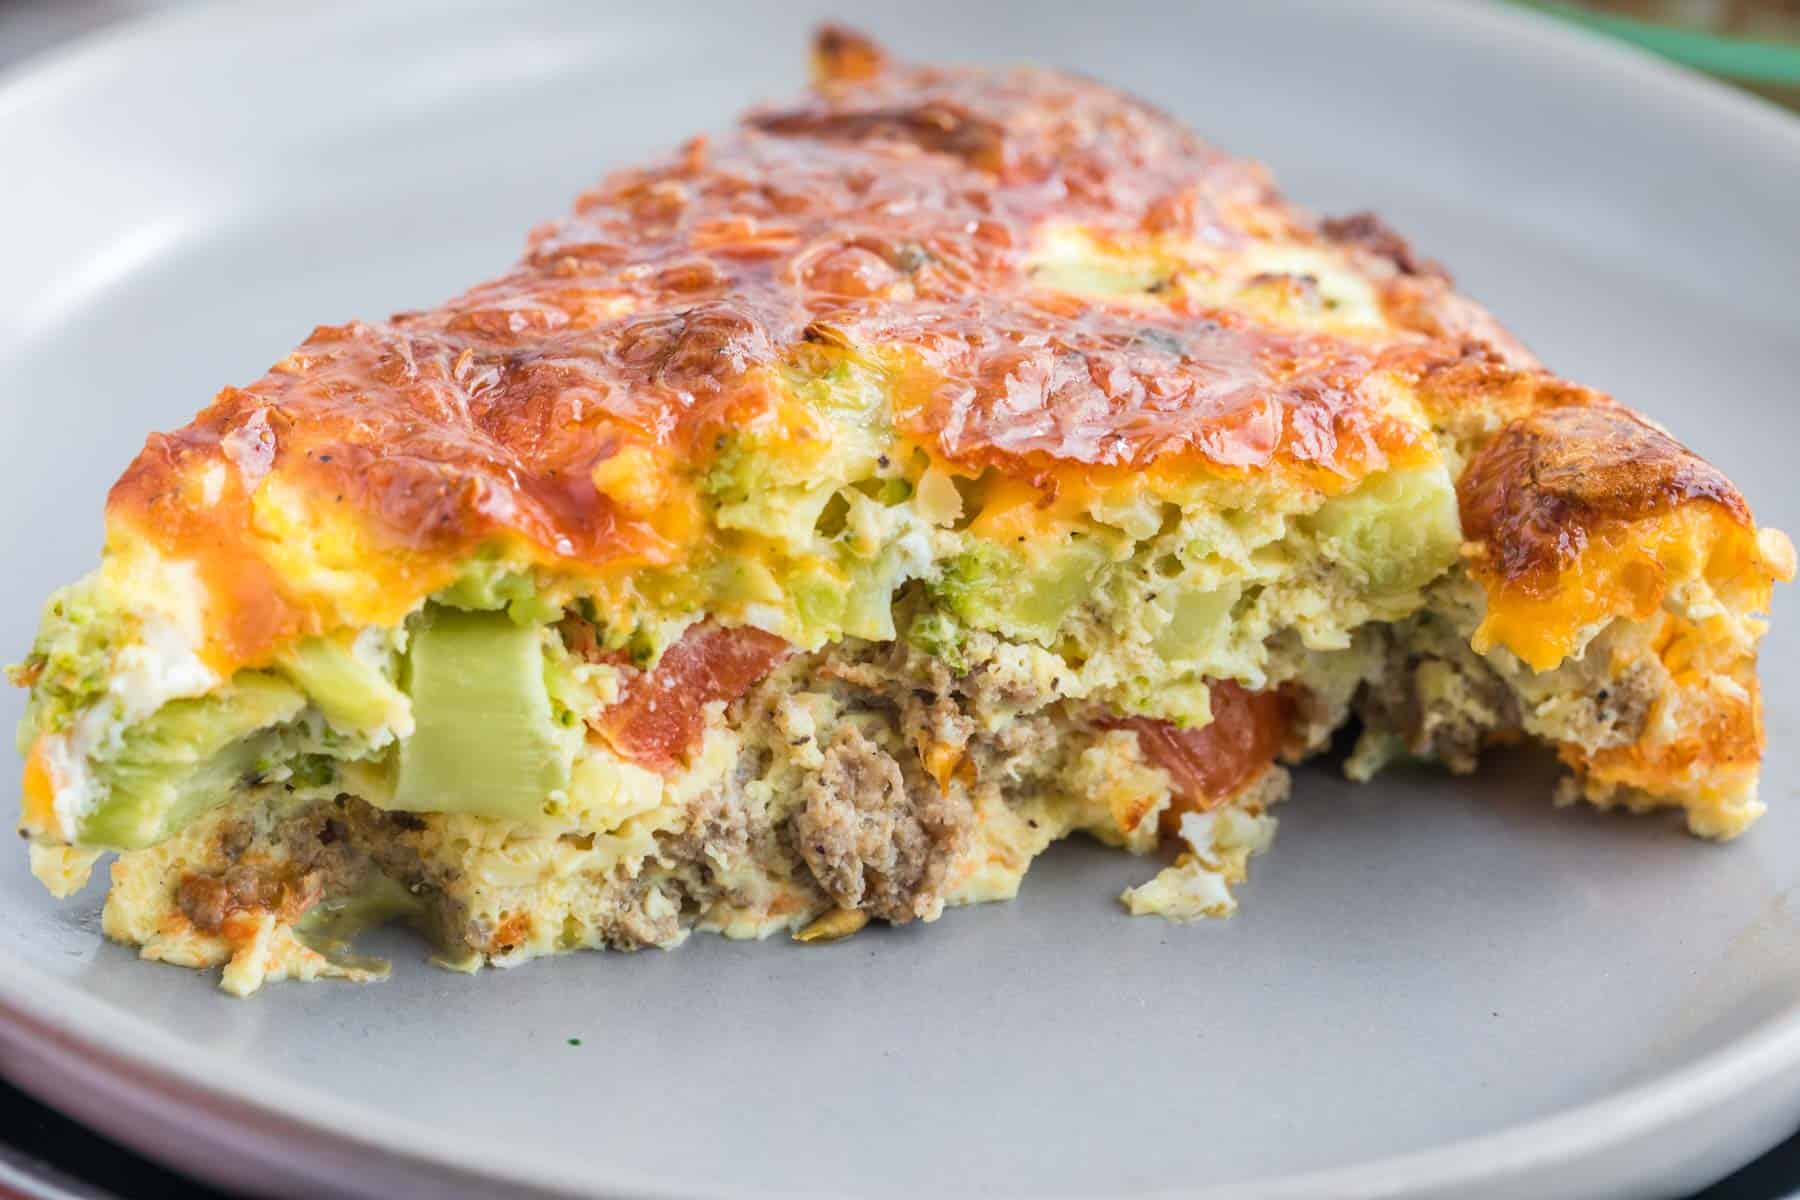 A close-up of a slice of quiche showing chunks of broccoli, tomato and sausage.